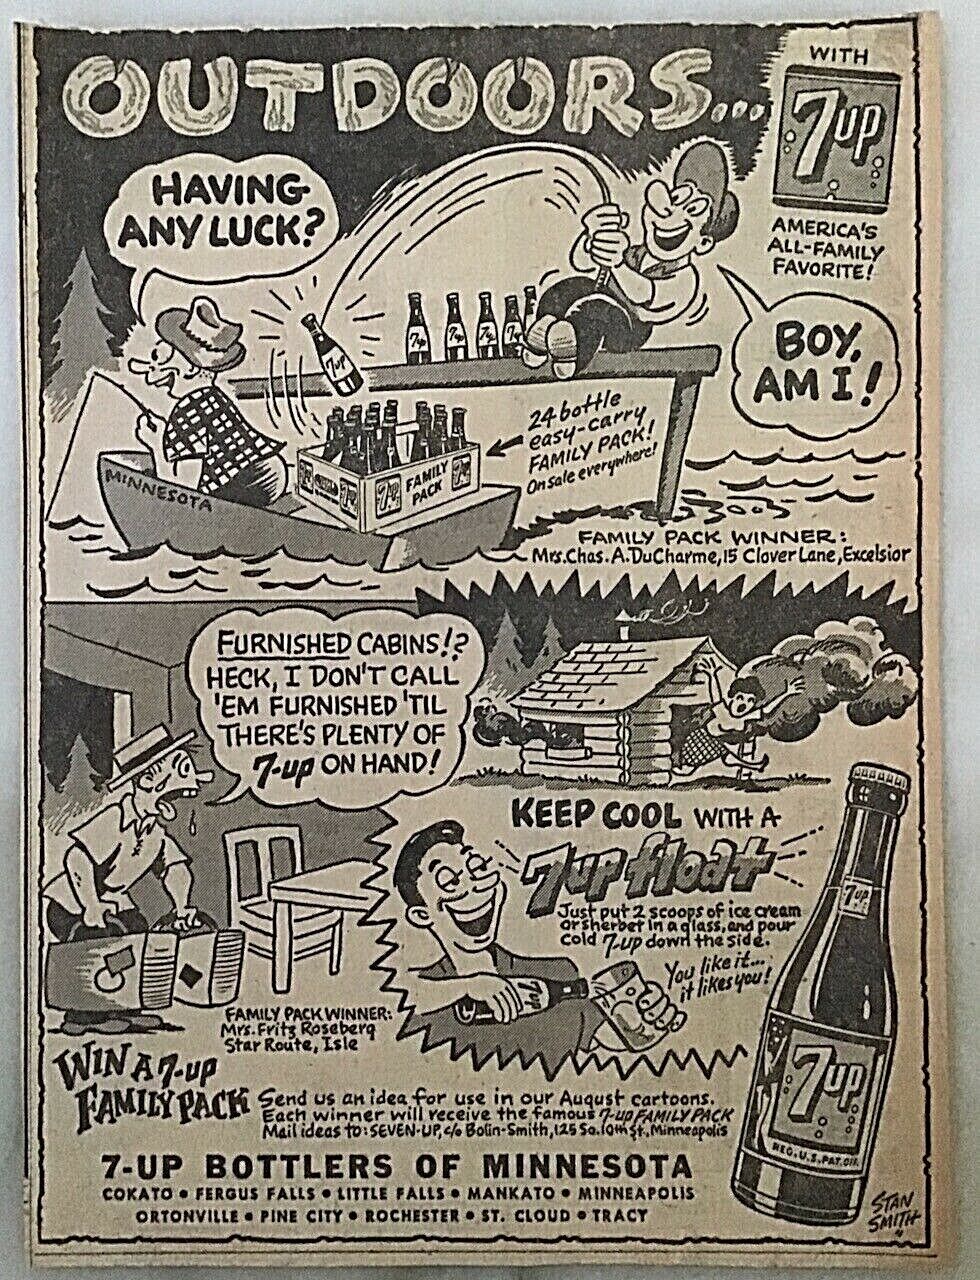 1950 newspaper ad for Seven Up, 7Up soda - Outdoors with 7Up, Stan Smith cartoon